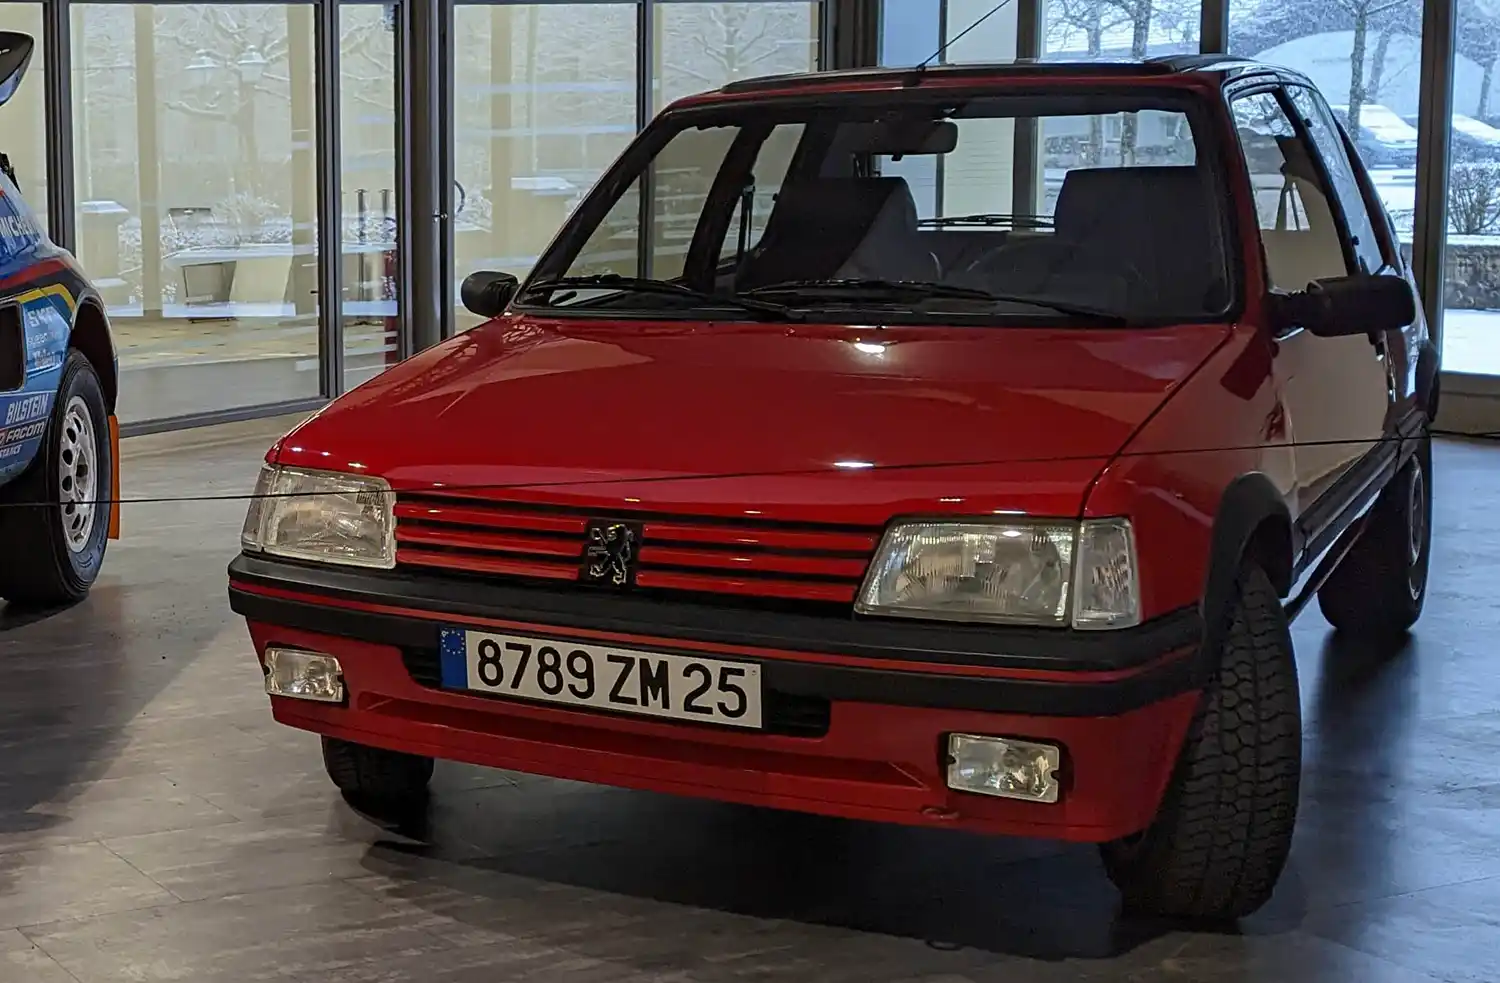 Video: The Peugeot 205 city car turns 40 - Drive